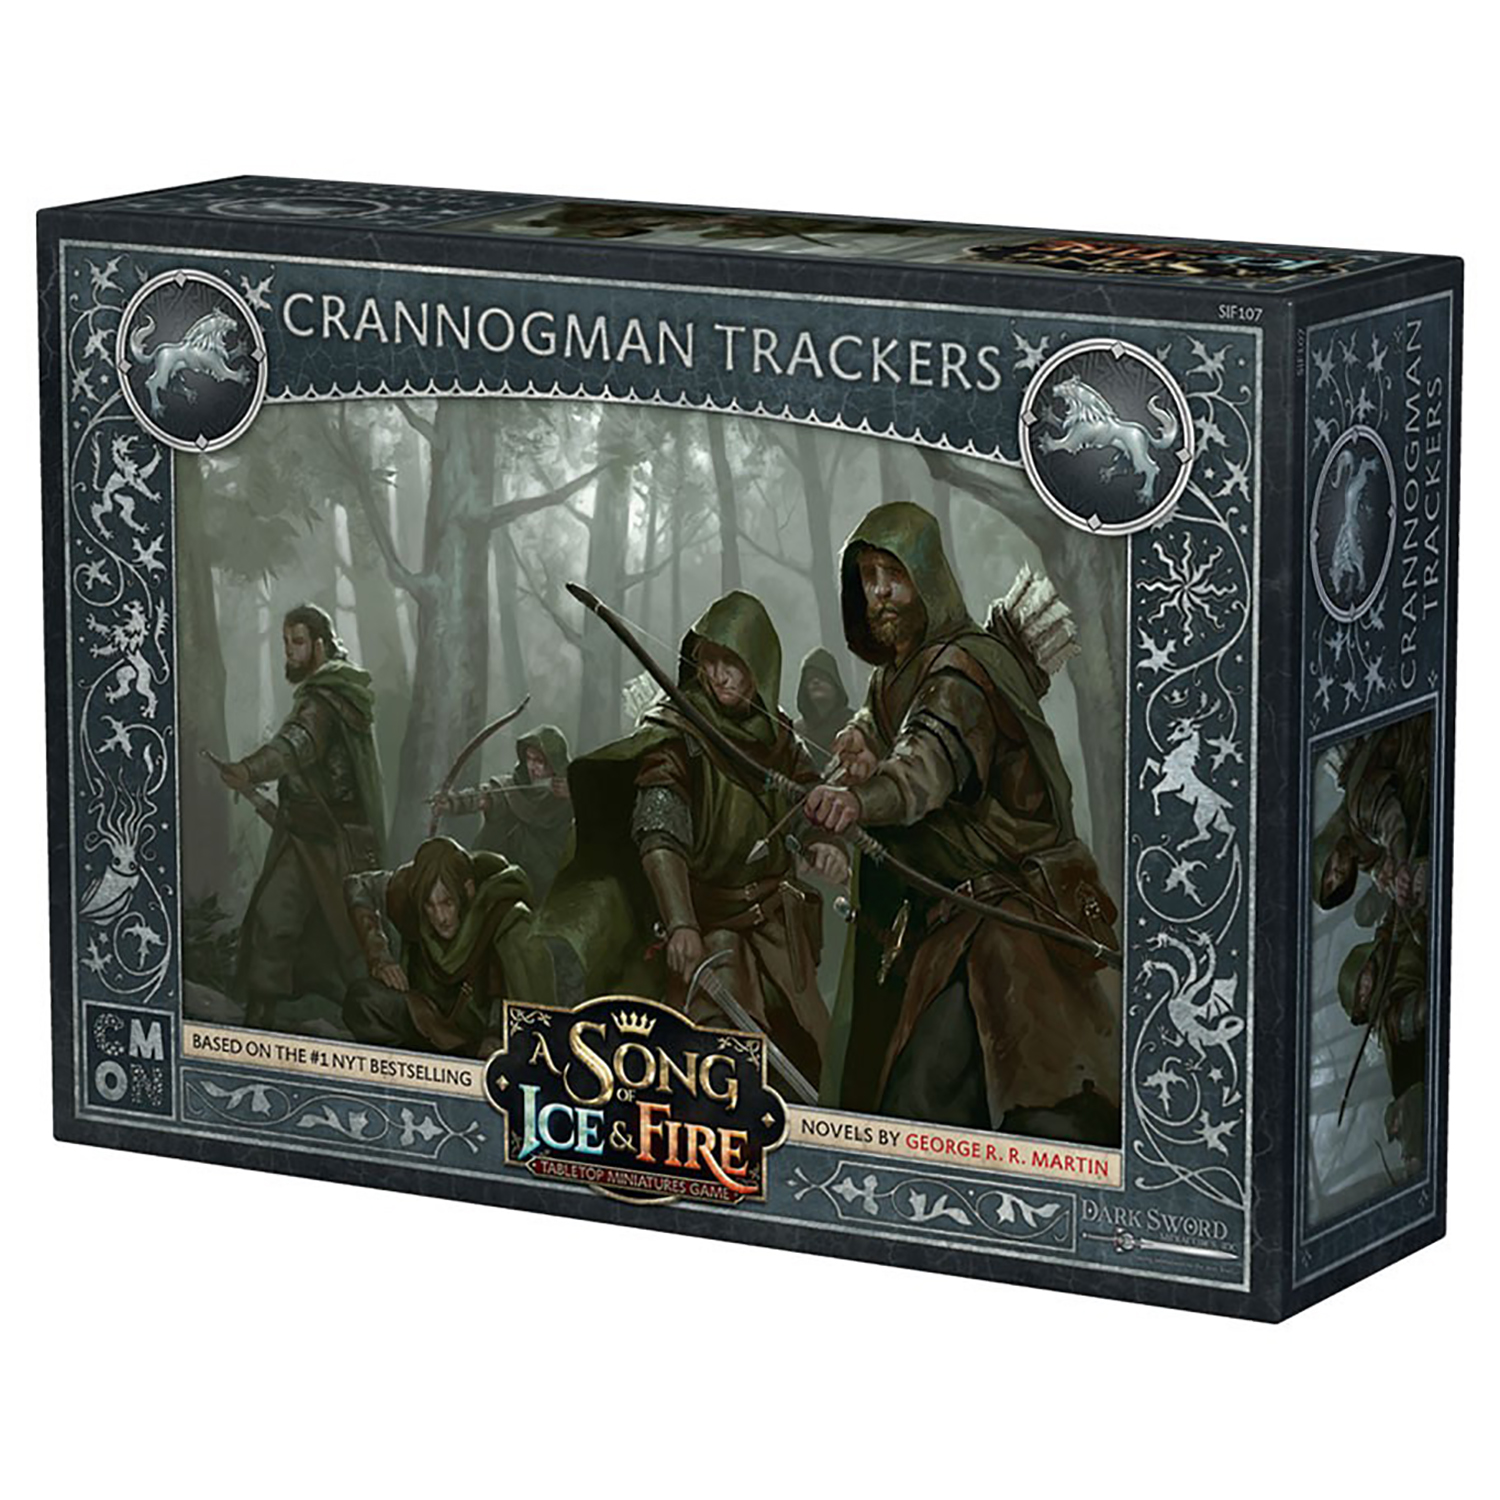 A Song of Ice & Fire: Tabletop Miniatures Game Stark Crannogman Trackers Unit Box, by CMON - image 1 of 6